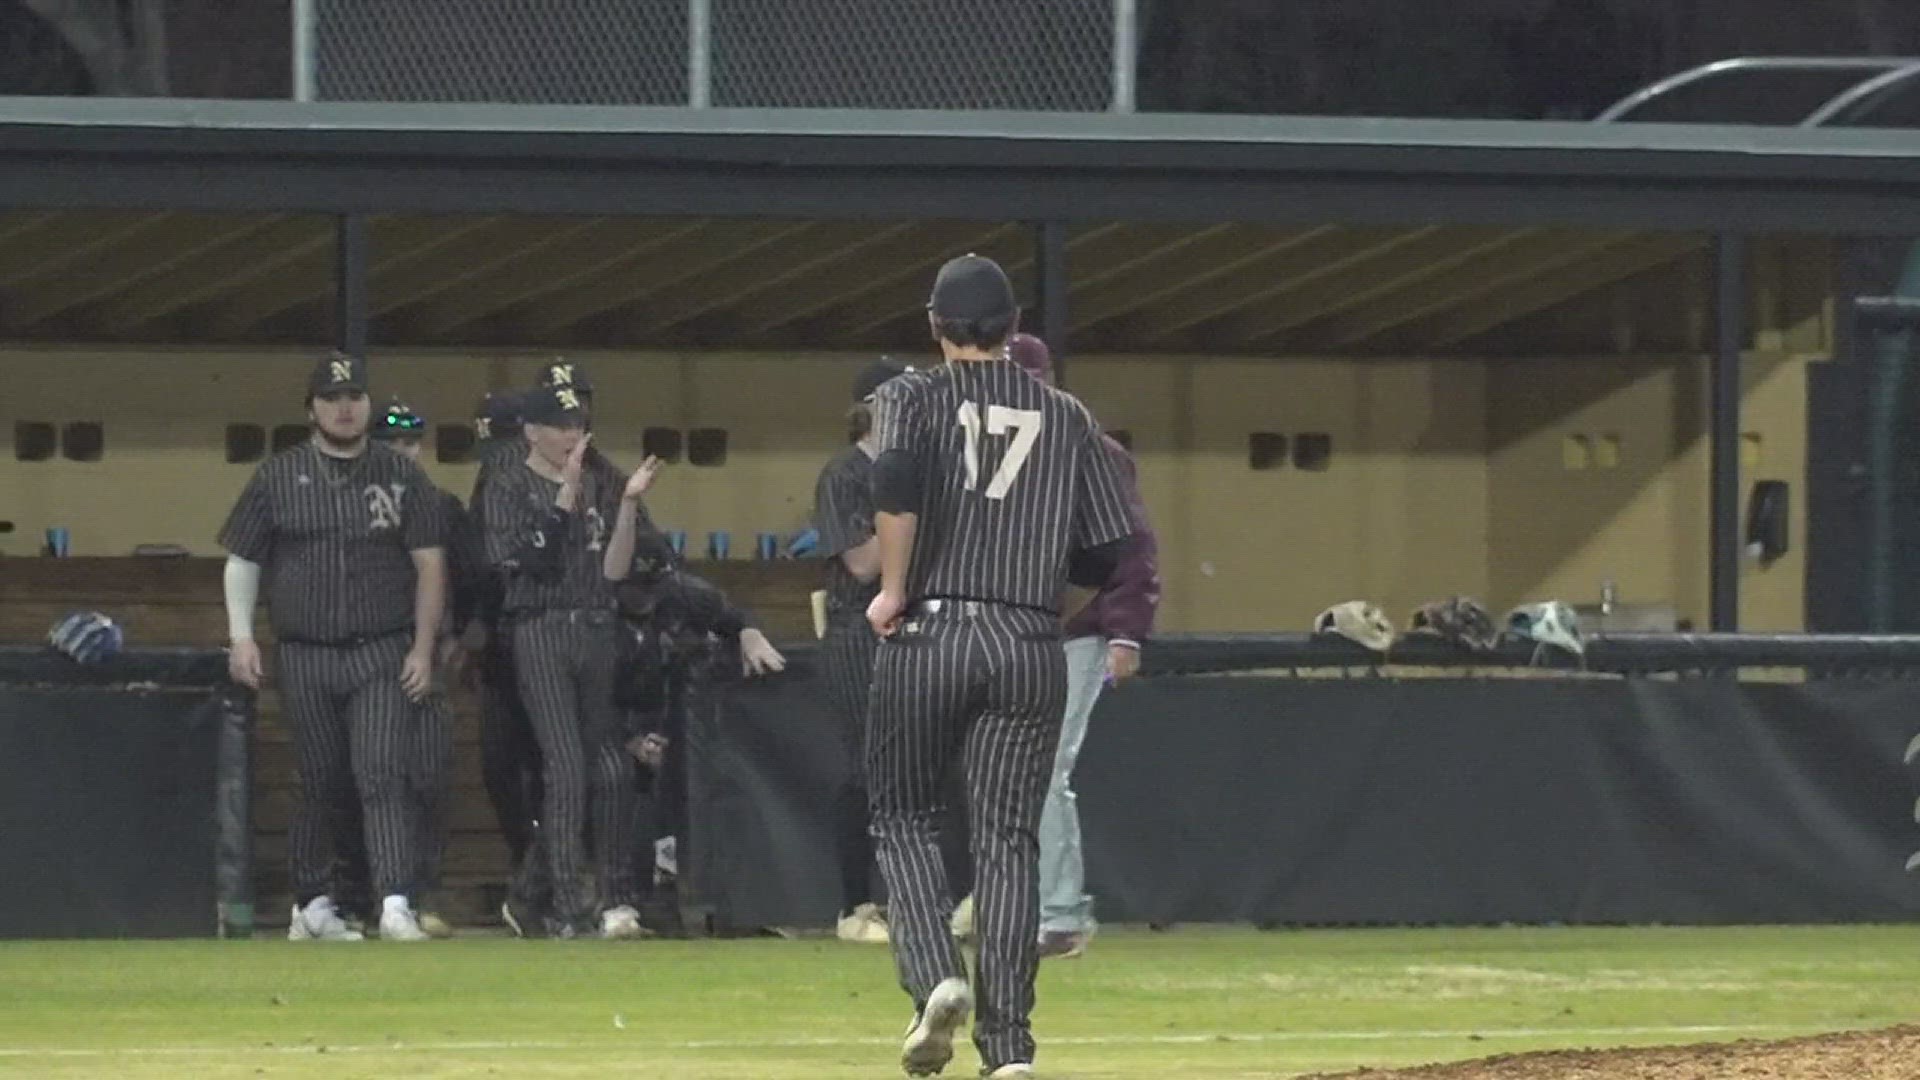 Nederland opens their season hosting the Silsbee Tigers as they march on to a No-Hit 10-0 win.